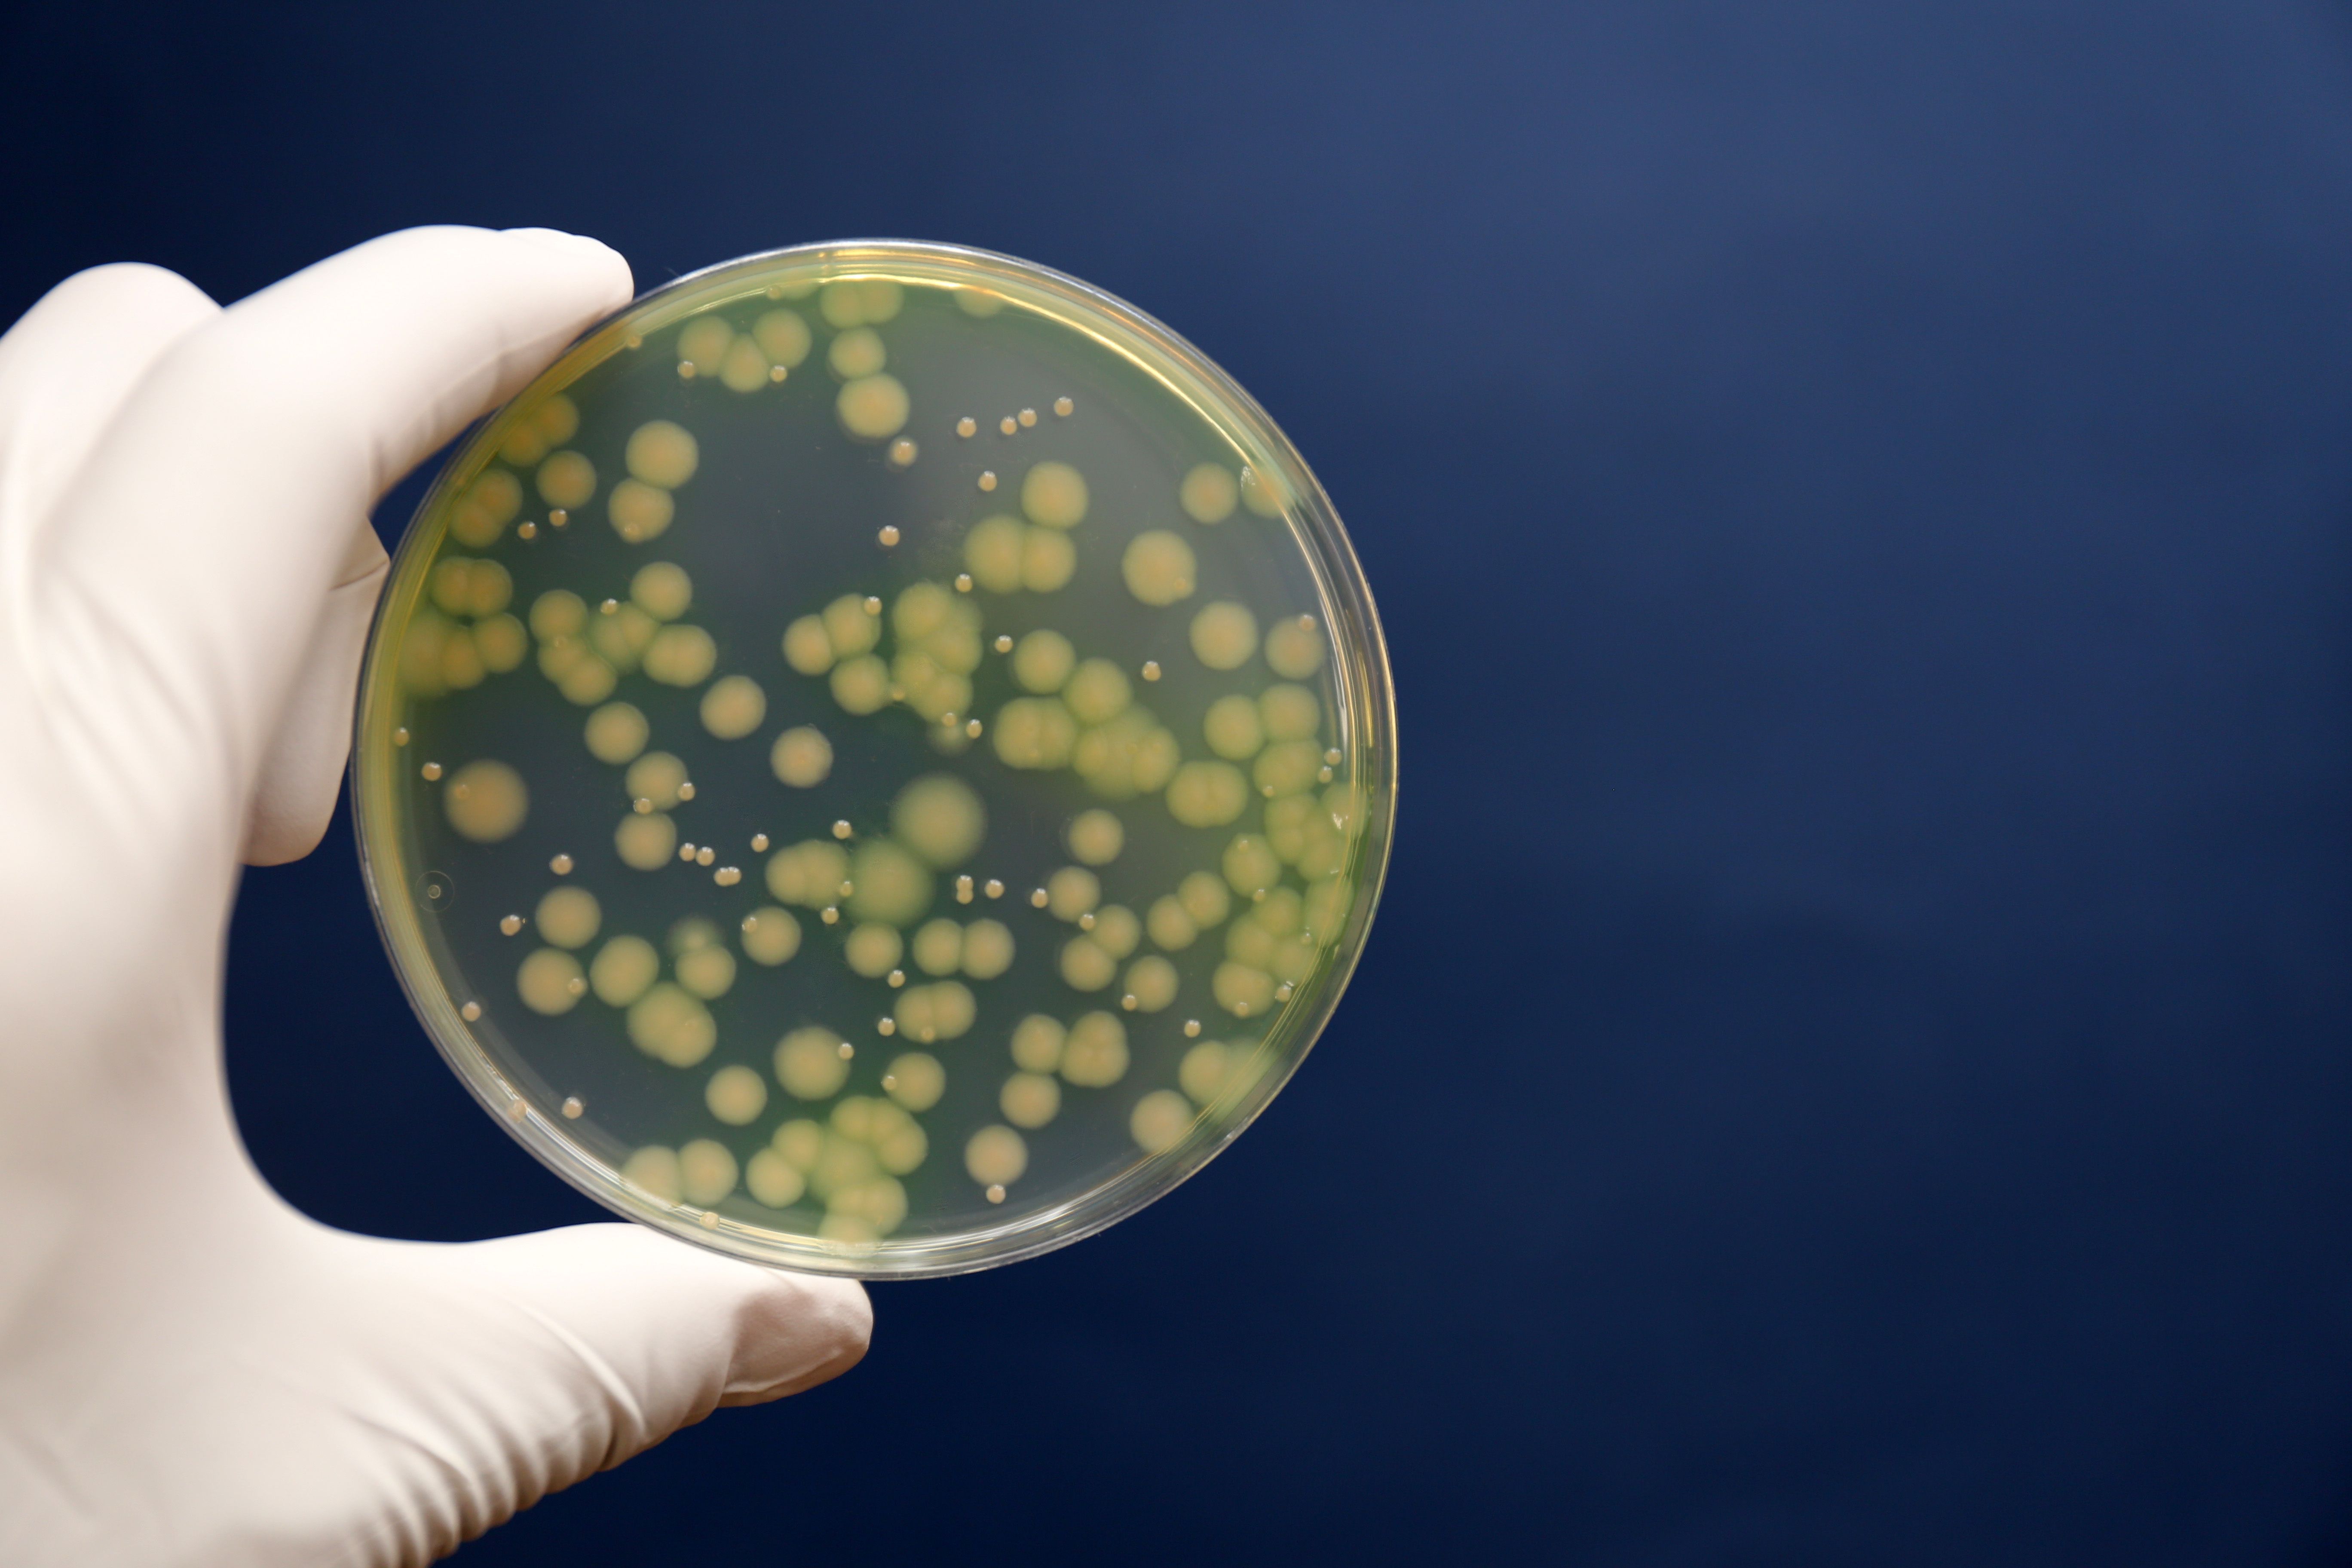 Using real-time genetic surveillance, investigators found bacterial infections rapidly develop antimicrobial resistance (AMR) to antibiotics, only to have these gene mutations disappear within a few days of switching to a different treatment.